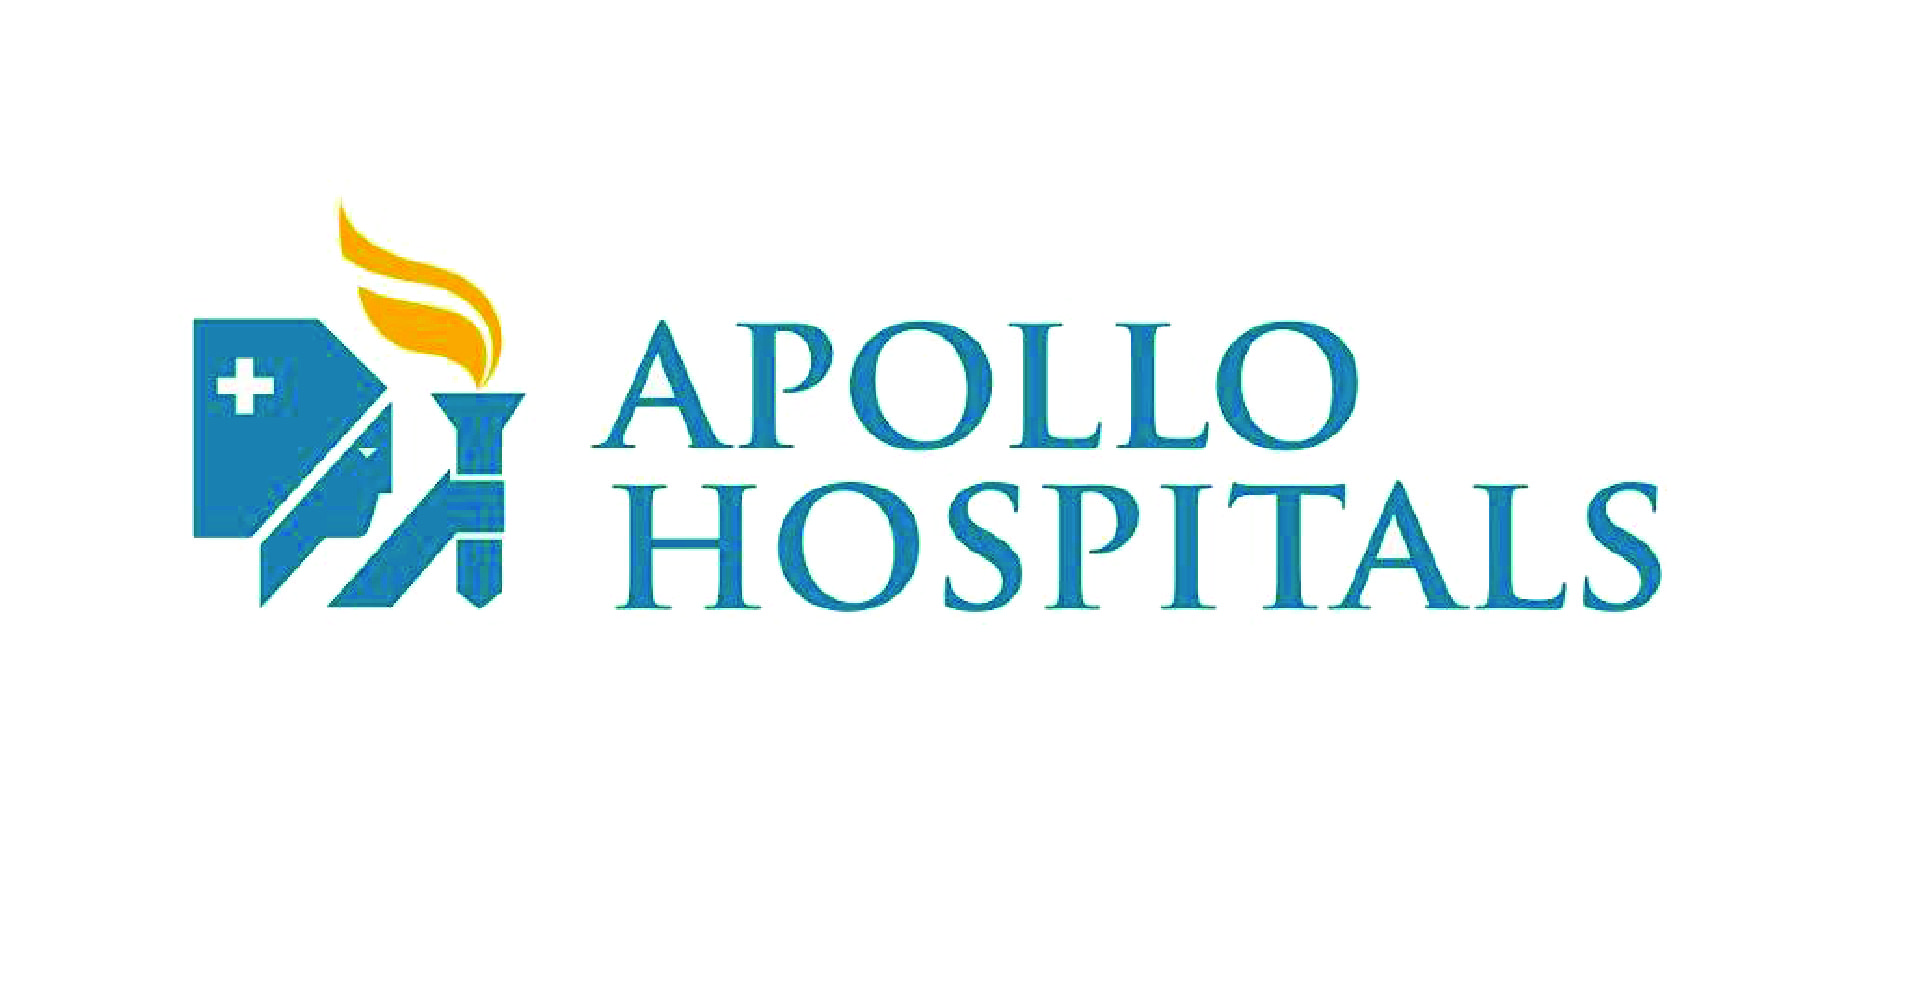 Why Apollo Hospital Share Price Is Falling